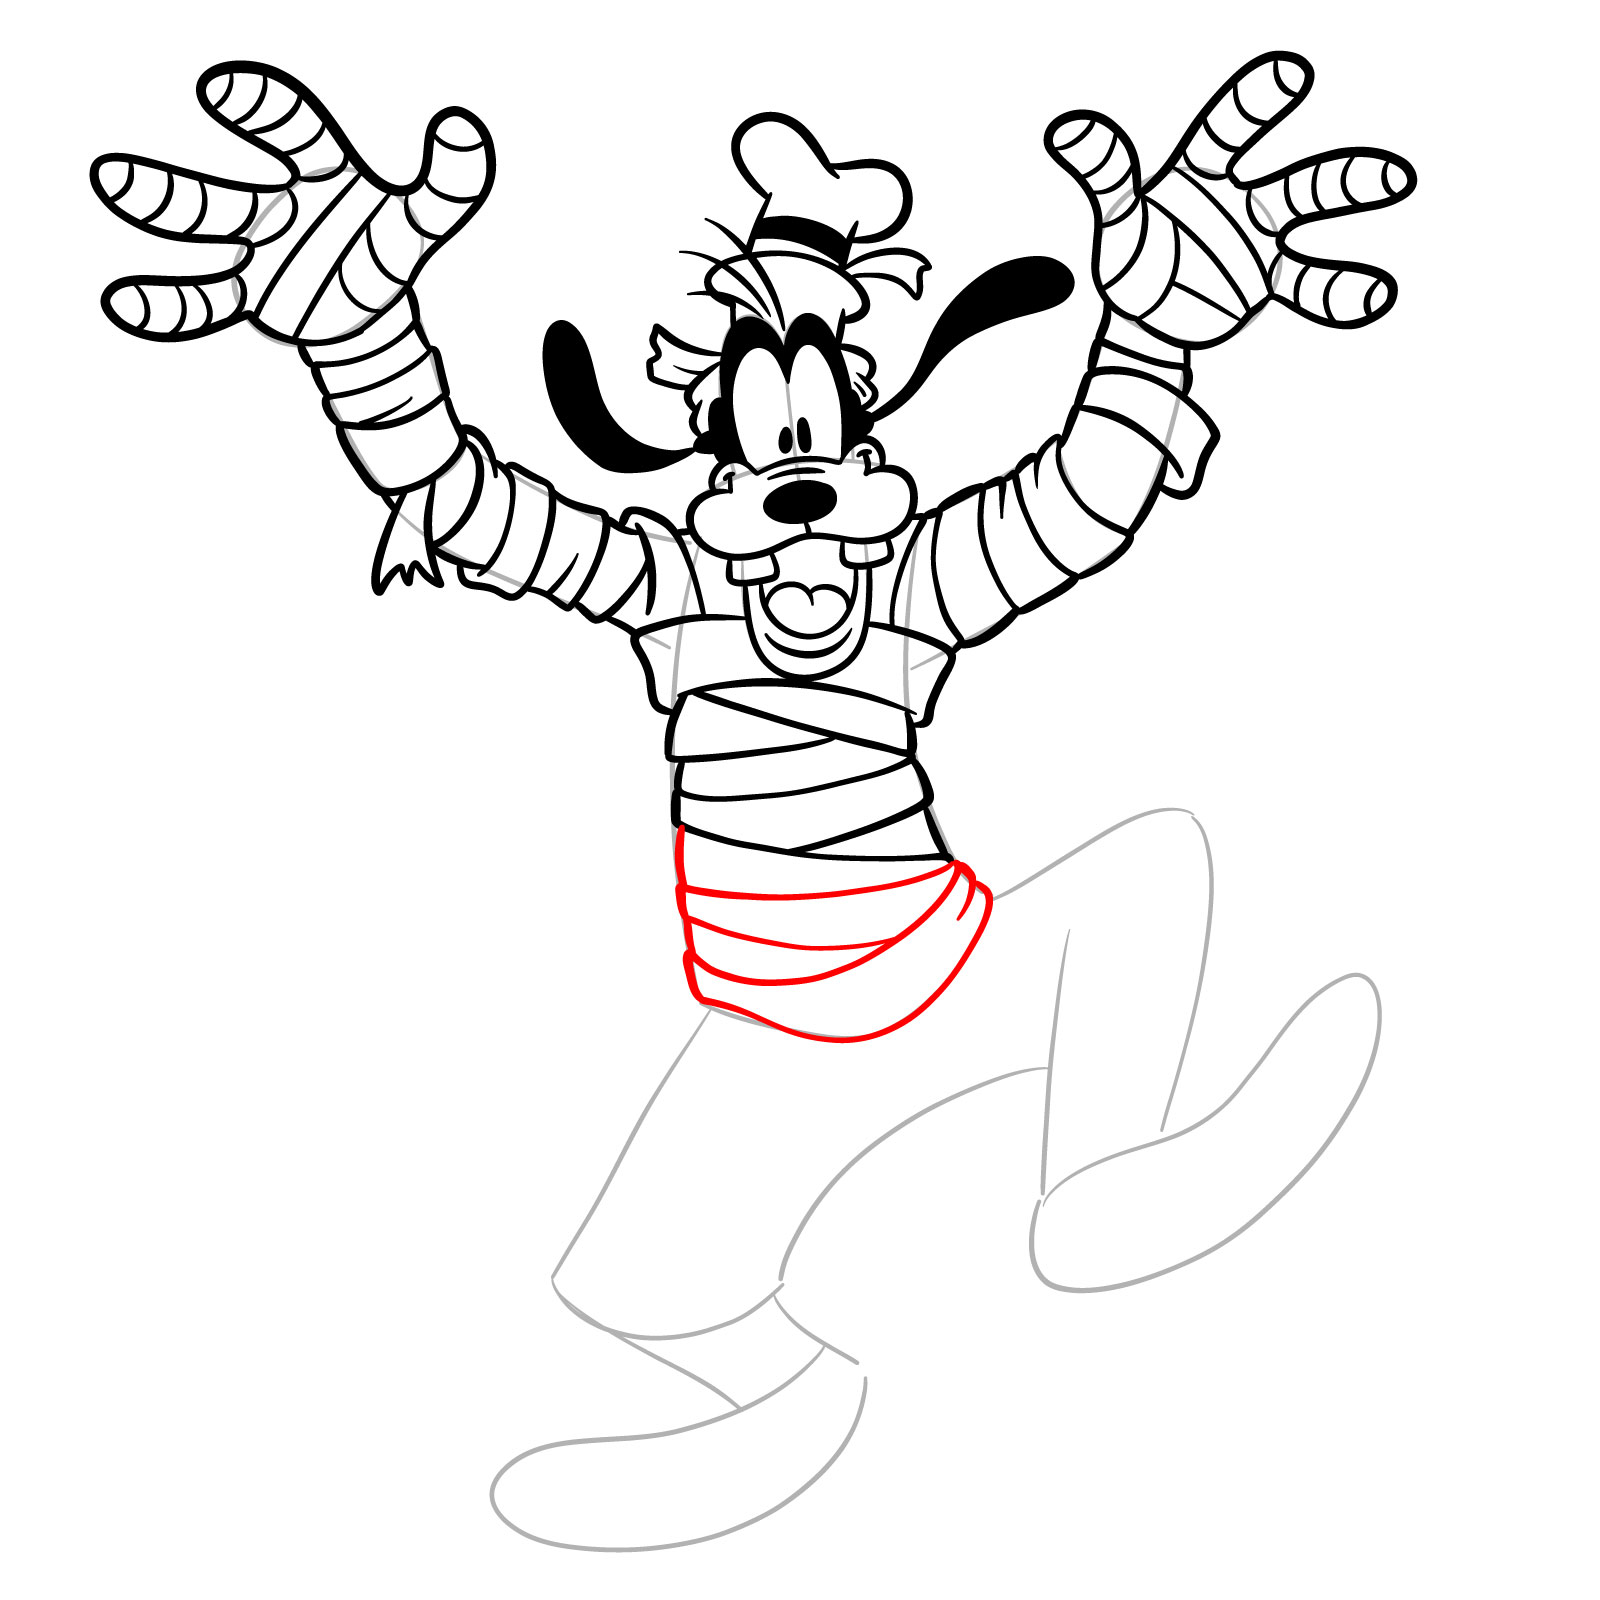 How to draw Halloween Goofy as a mummy - step 23